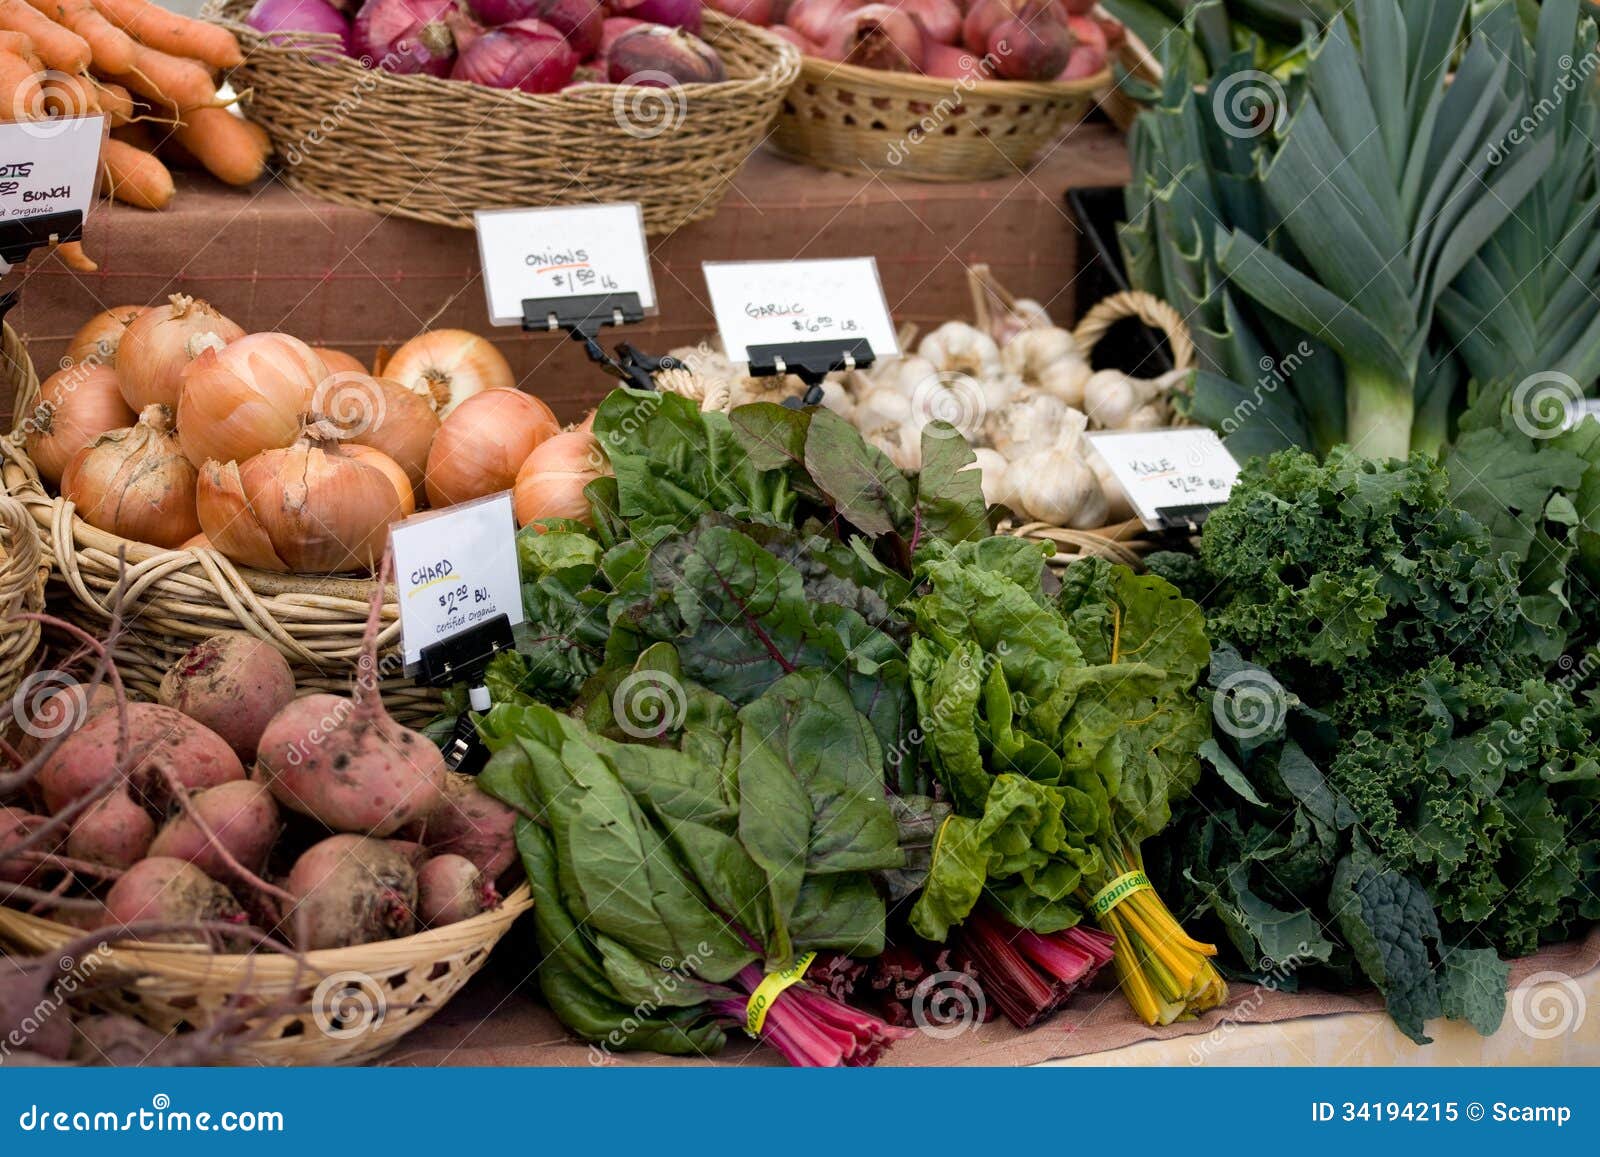 produce at local farmers market